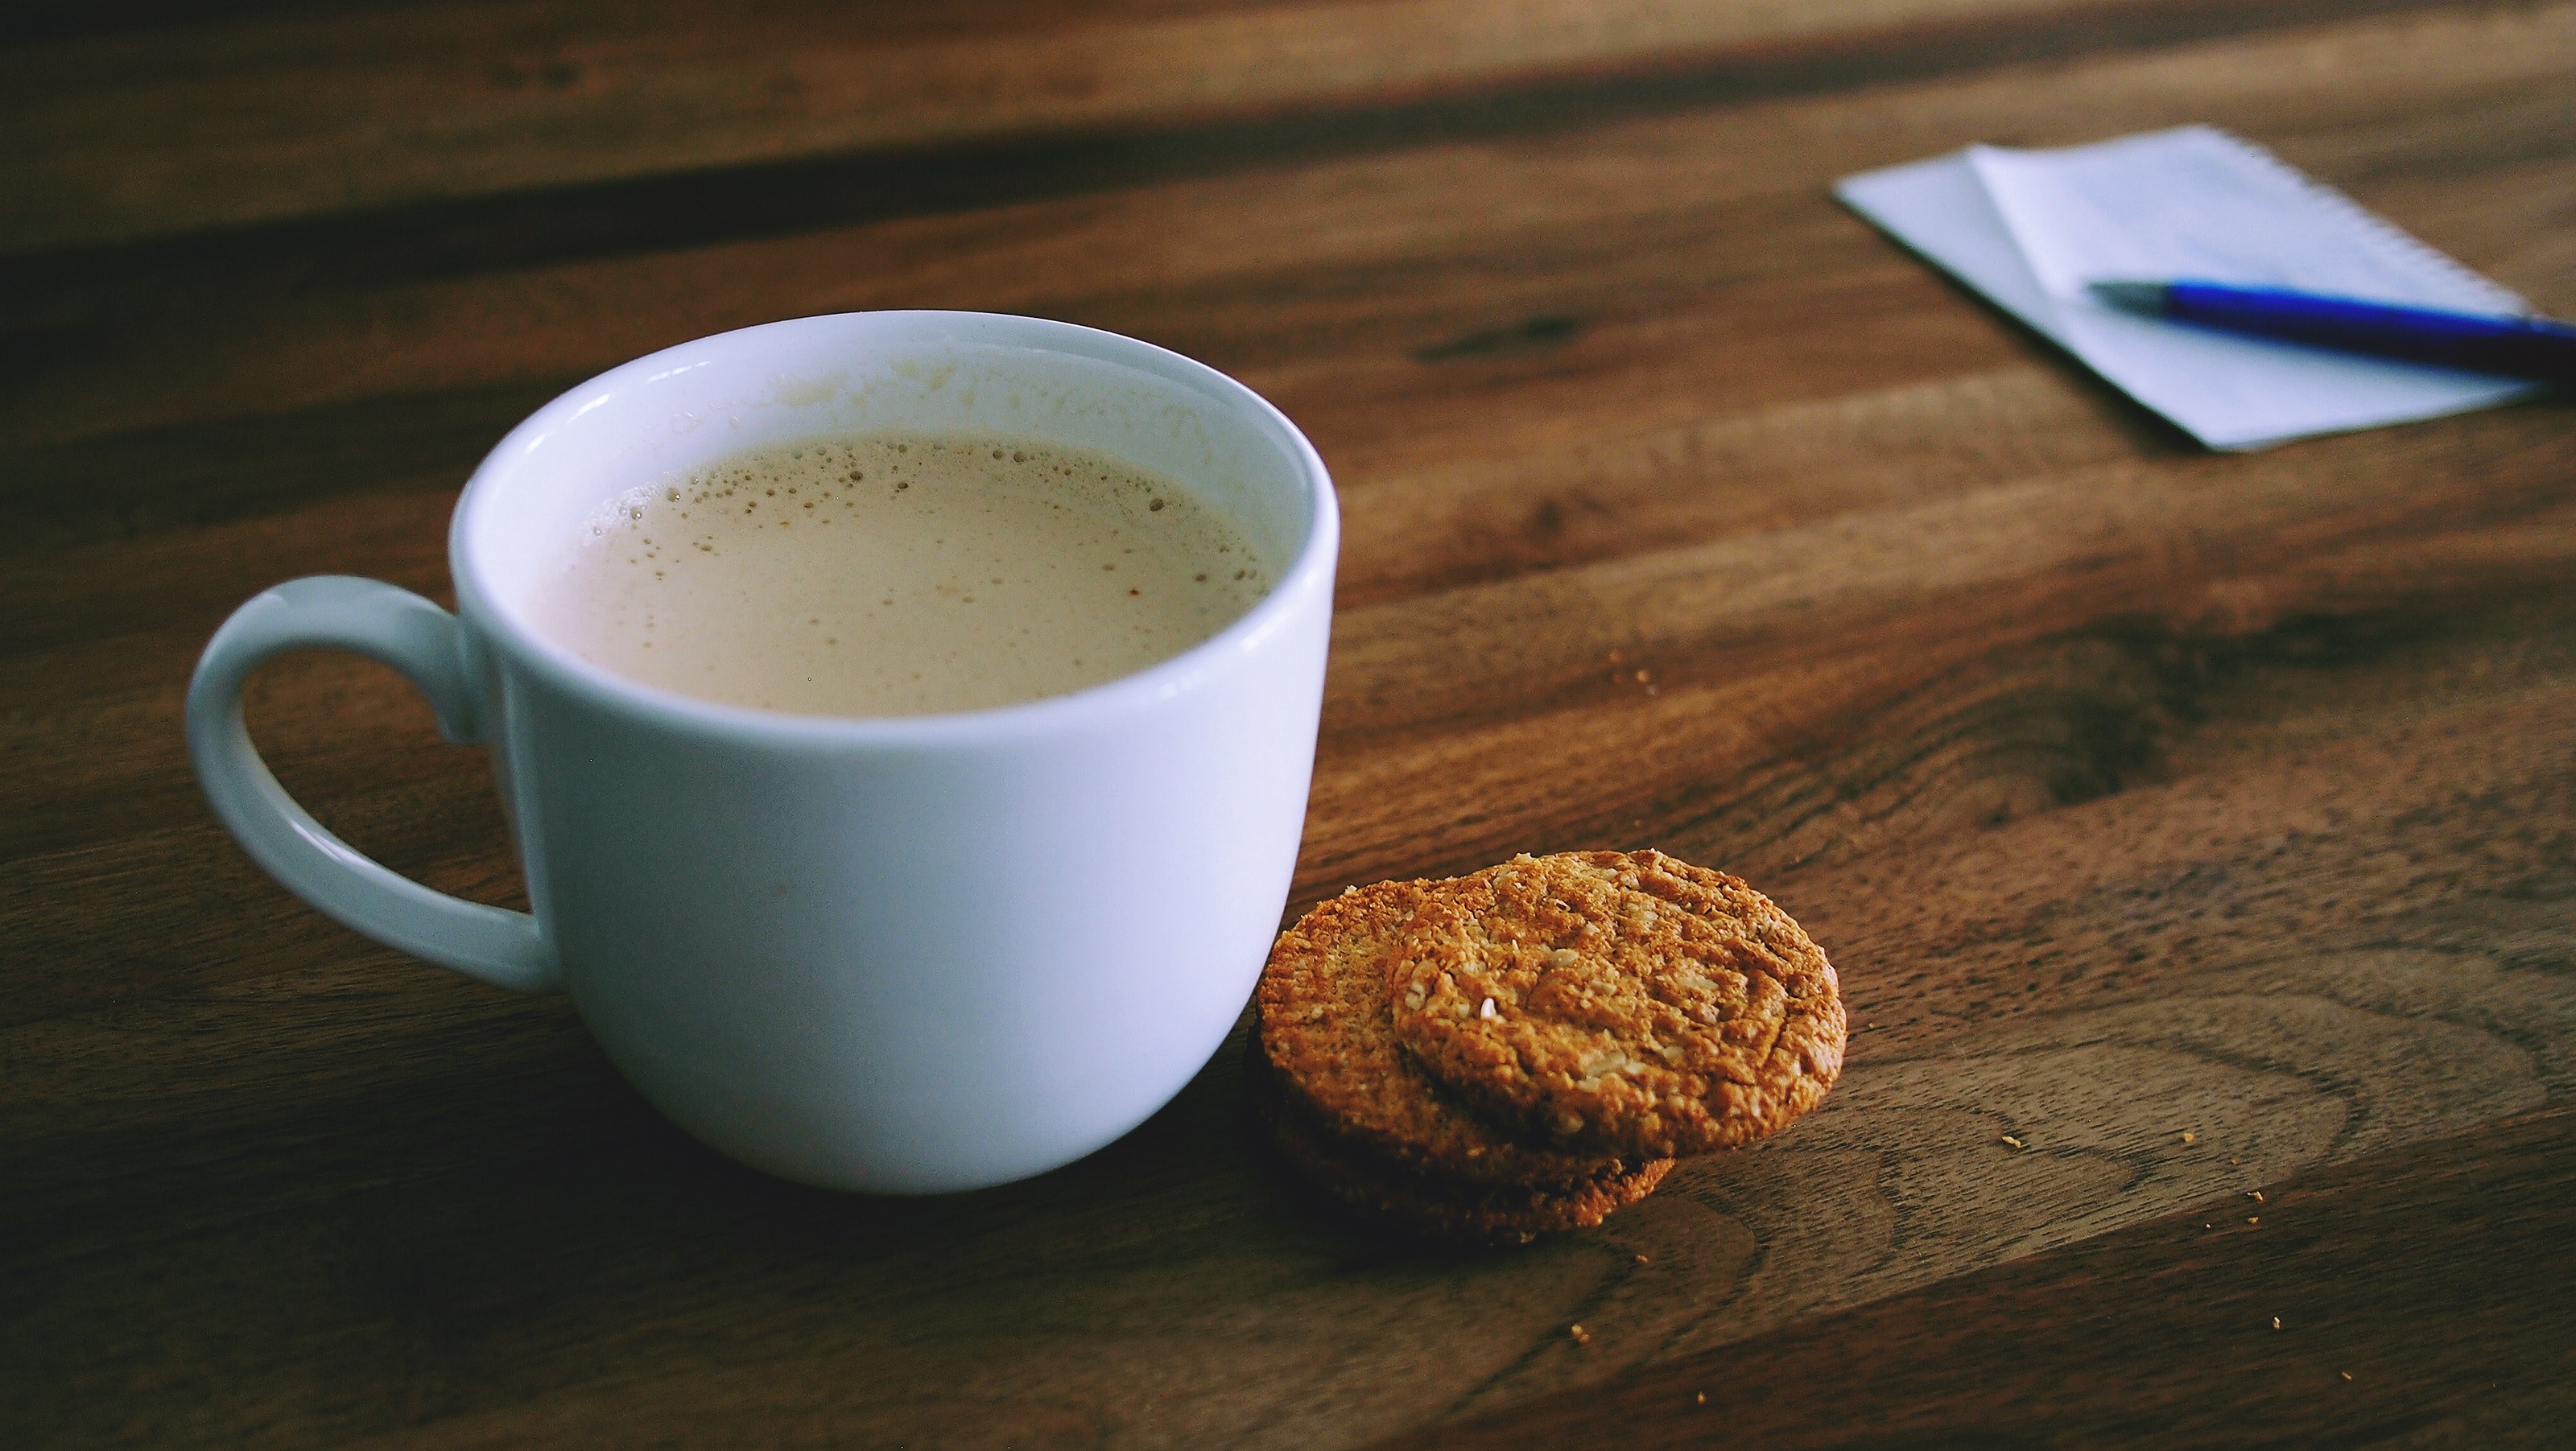 #3200x1803 A Mug Of Coffee With A Biscuit Sitting Next - Cup Of Coffee And Biscuit , HD Wallpaper & Backgrounds